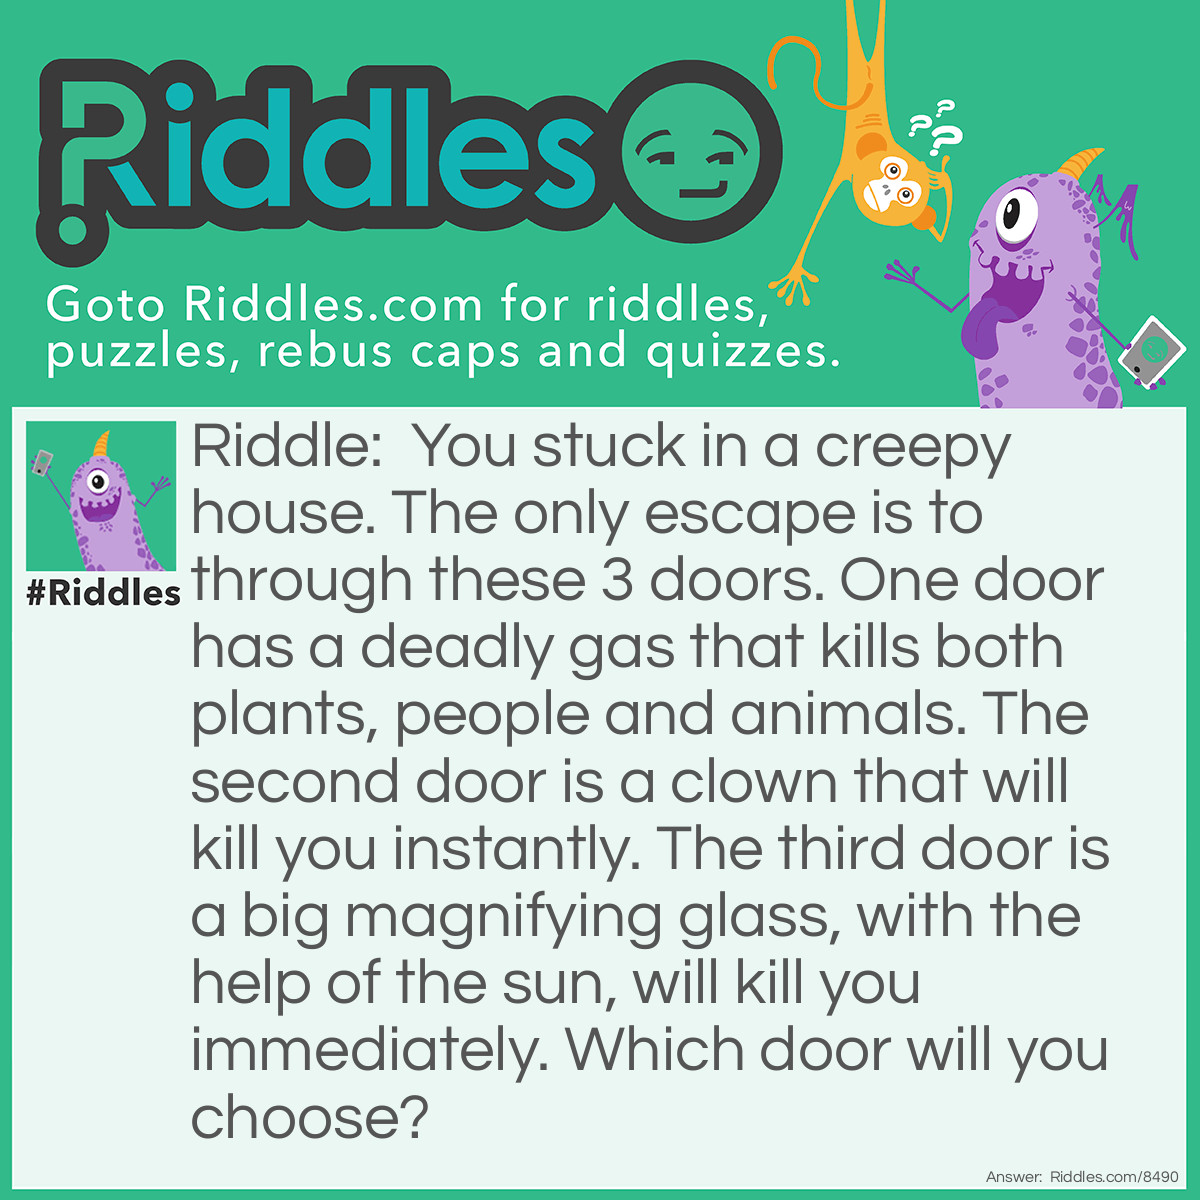 Riddle: You stuck in a creepy house. The only escape is to through these 3 doors. One door has a deadly gas that kills both plants, people and animals. The second door is a clown that will kill you instantly. The third door is a big magnifying glass, with the help of the sun, will kill you immediately. Which door will you choose? Answer: The Third door. Wait until the sun sets.